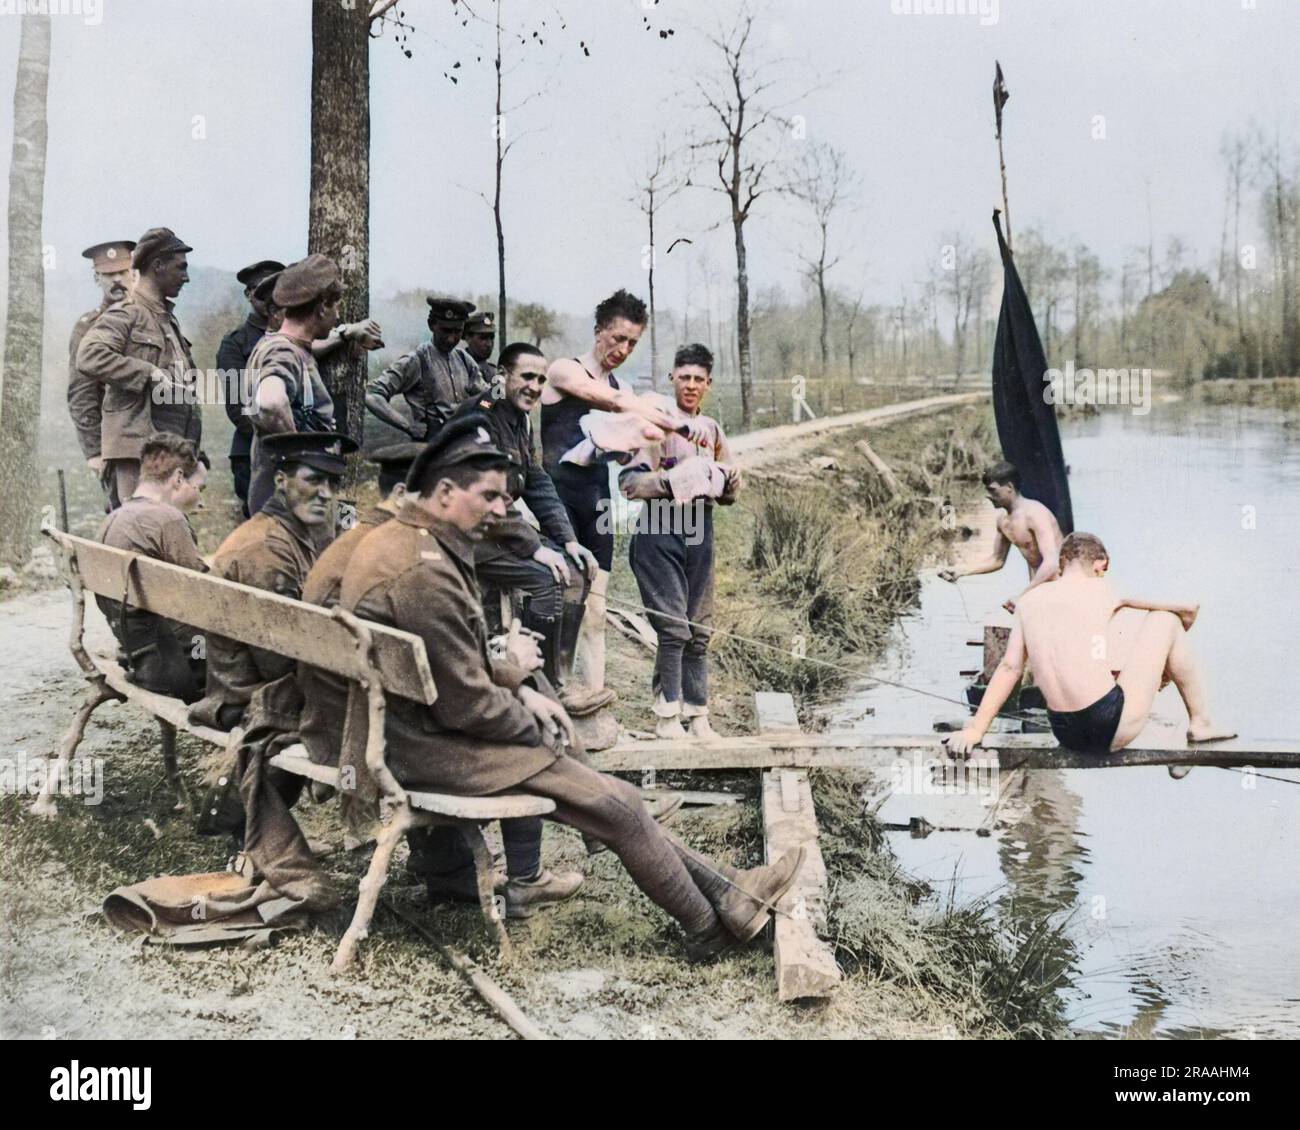 British soldiers relaxing and swimming during a break in fighting, on the Western Front during World War One.     Date: circa 1916 Stock Photo